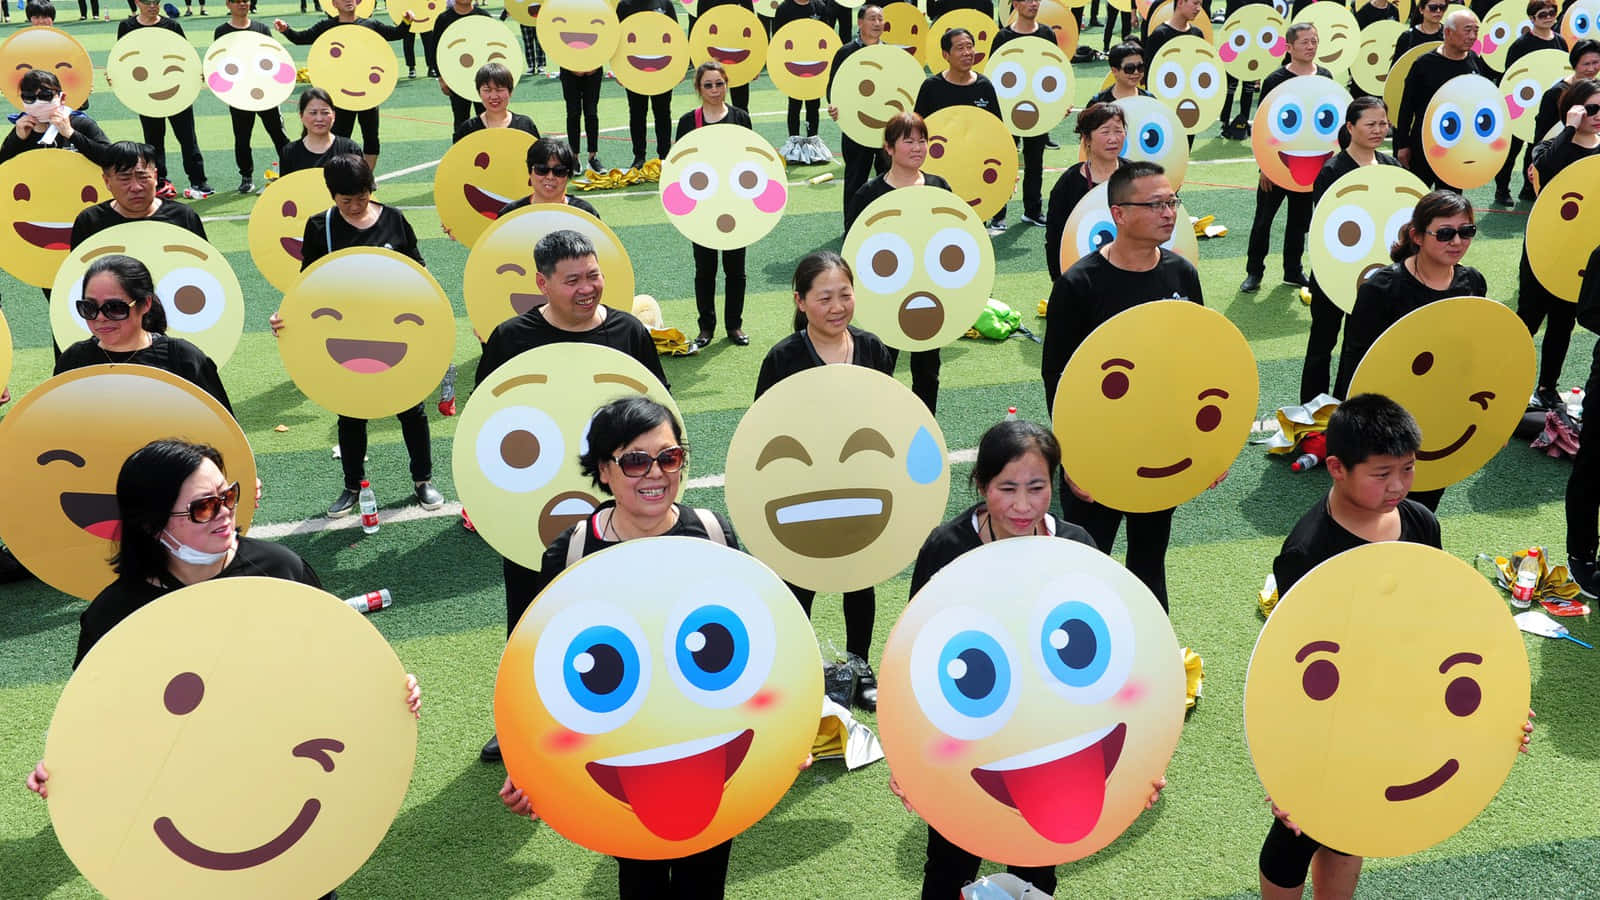 A Group Of People Holding Up Emojis